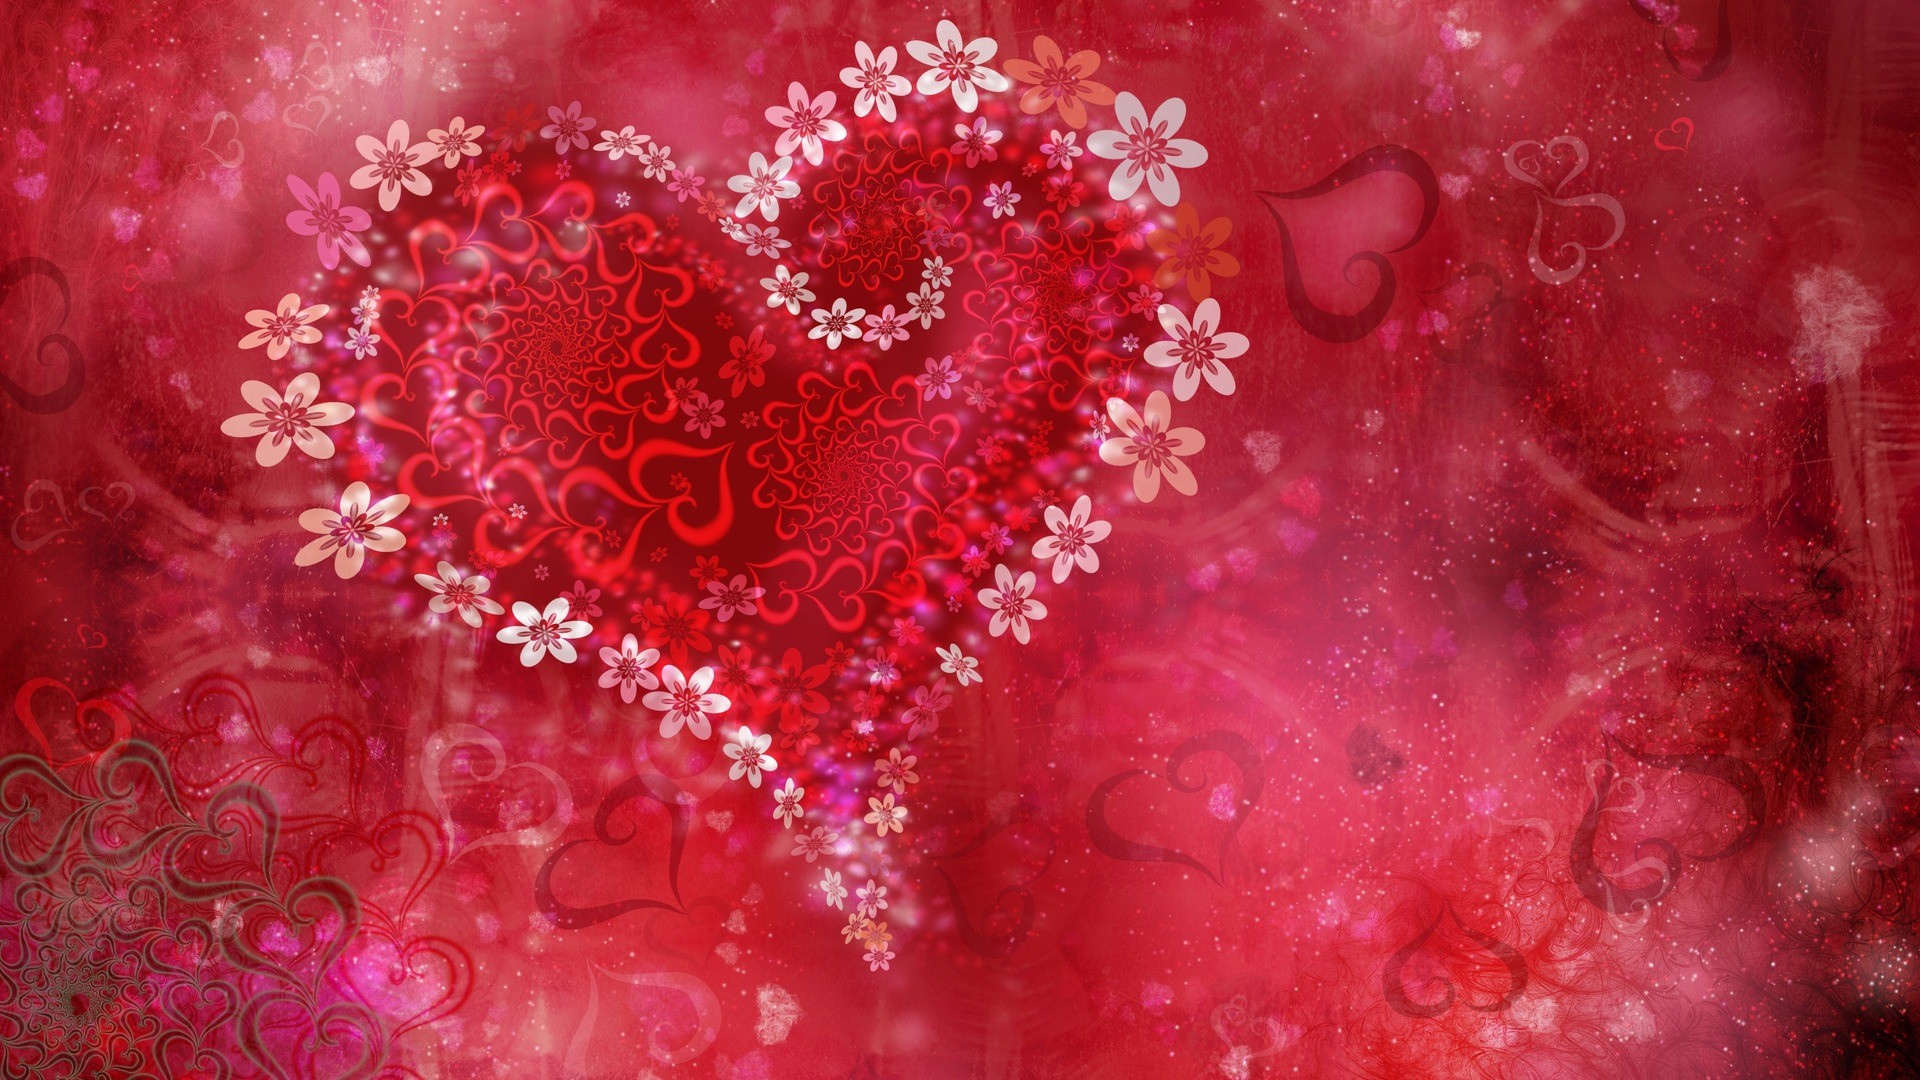 1920x1080 Red Heart Abstract Backgrounds for Presentation - PPT Backgrounds Templates